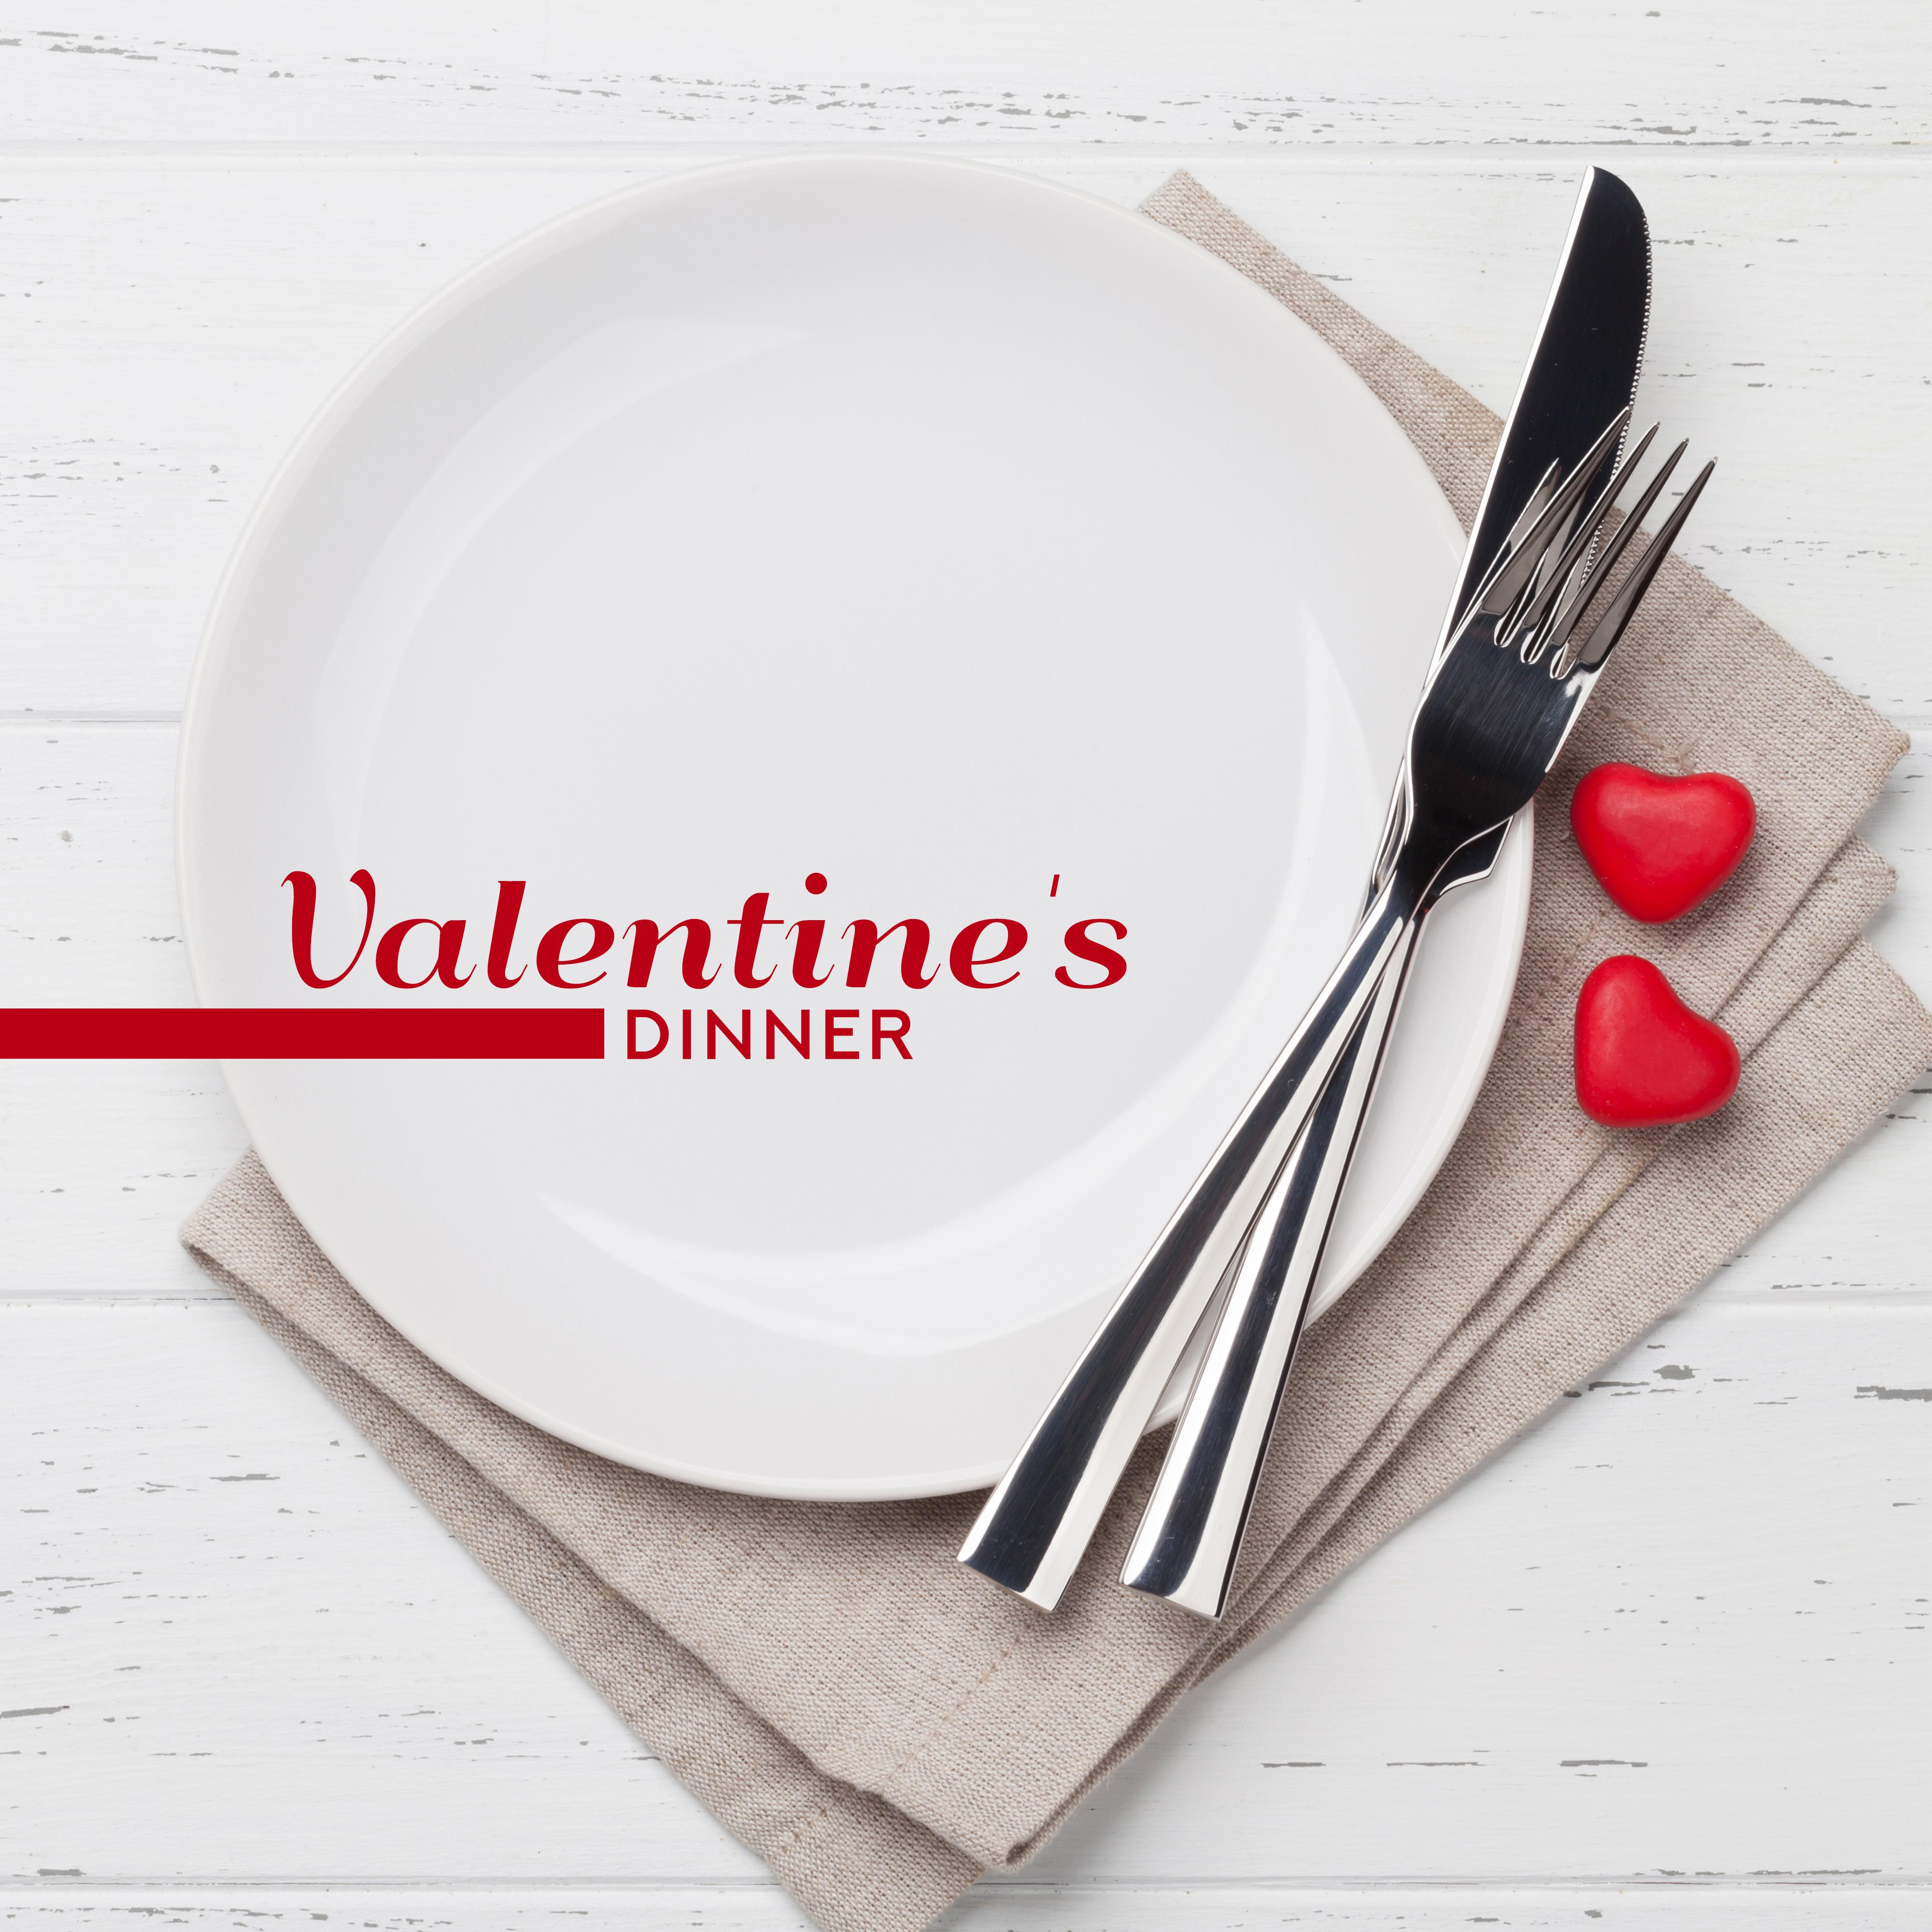 Valentine's Dinner – Relaxing Jazz for Lovers, Erotic Jazz Music, Peaceful Songs at Night, Romantic Jazz for Relaxation